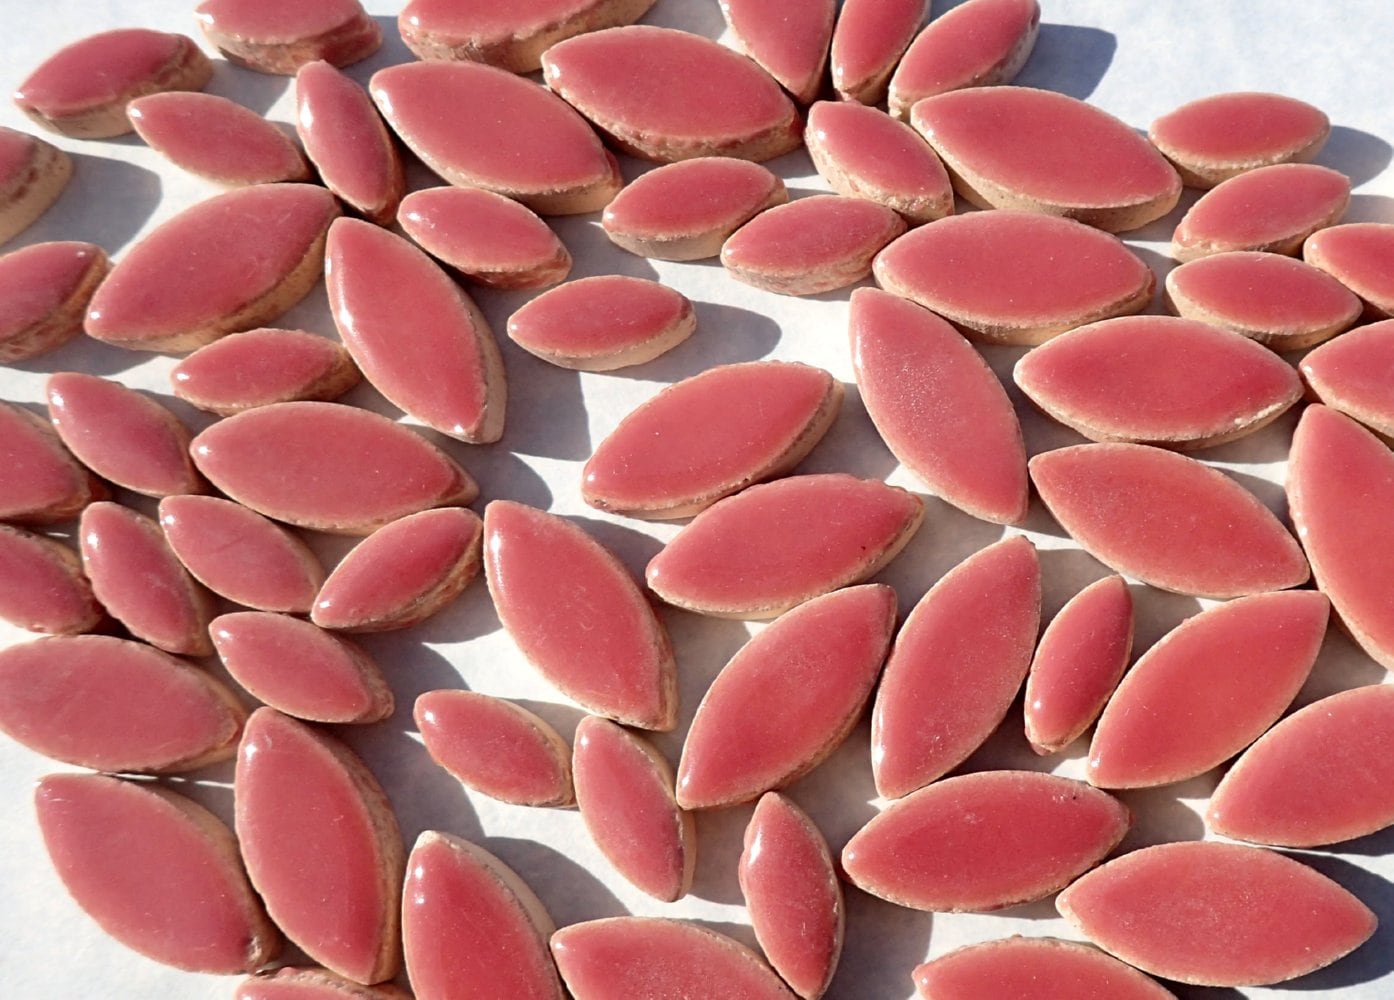 Dusty Rose Petals Mosaic Tiles - 50g Ceramic Leaves in Mix of 2 Sizes 1/2" and 3/4" - Deep Pink